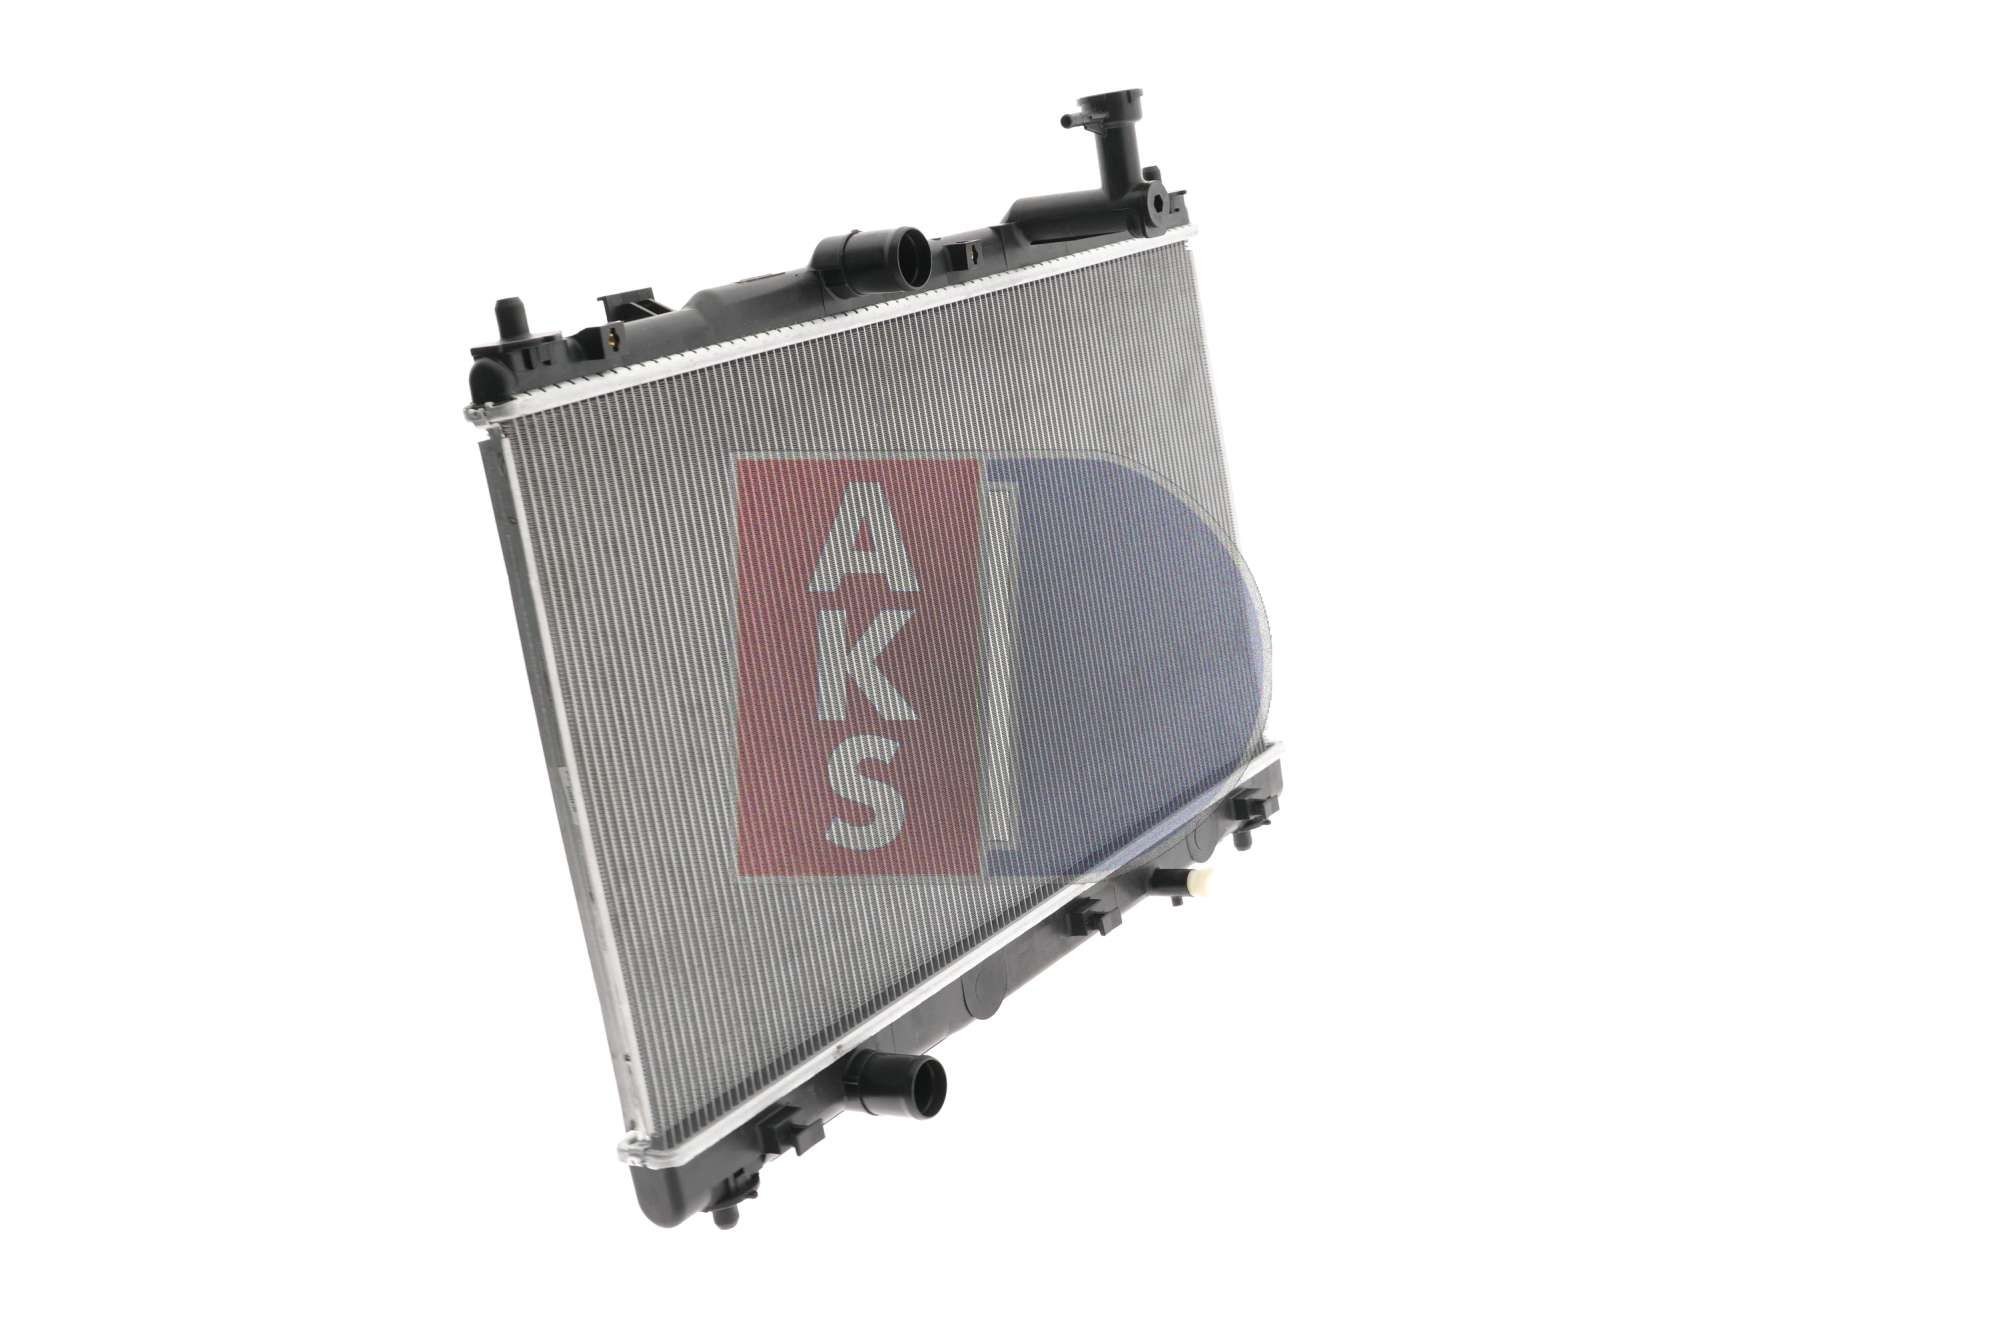 320064N Radiator 320064N AKS DASIS Aluminium, for vehicles with/without air conditioning, 375 x 683 x 16 mm, Manual Transmission, Brazed cooling fins